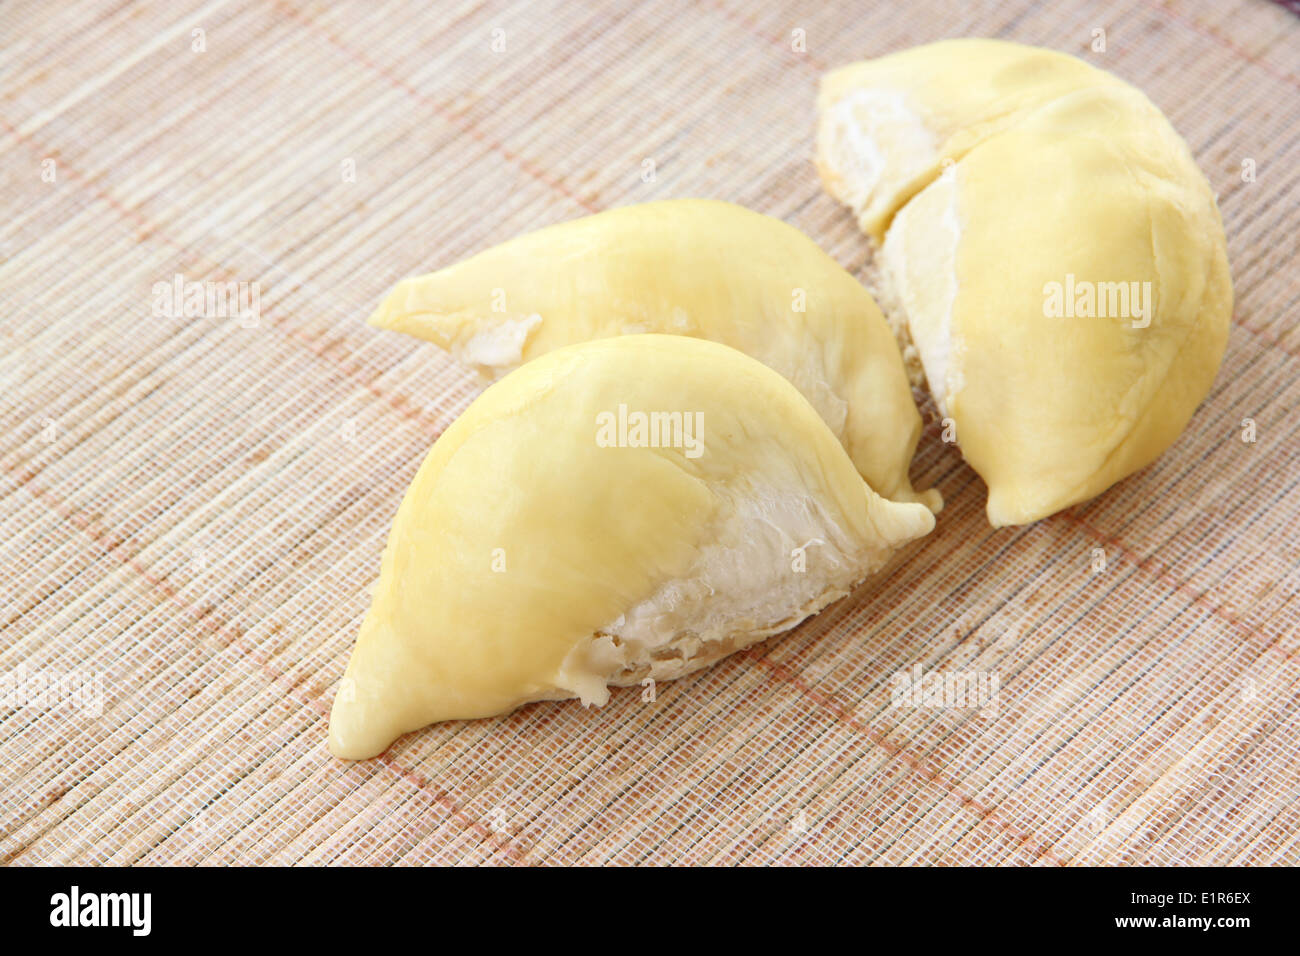 flesh durian of tropical fruit in Thailand. Stock Photo